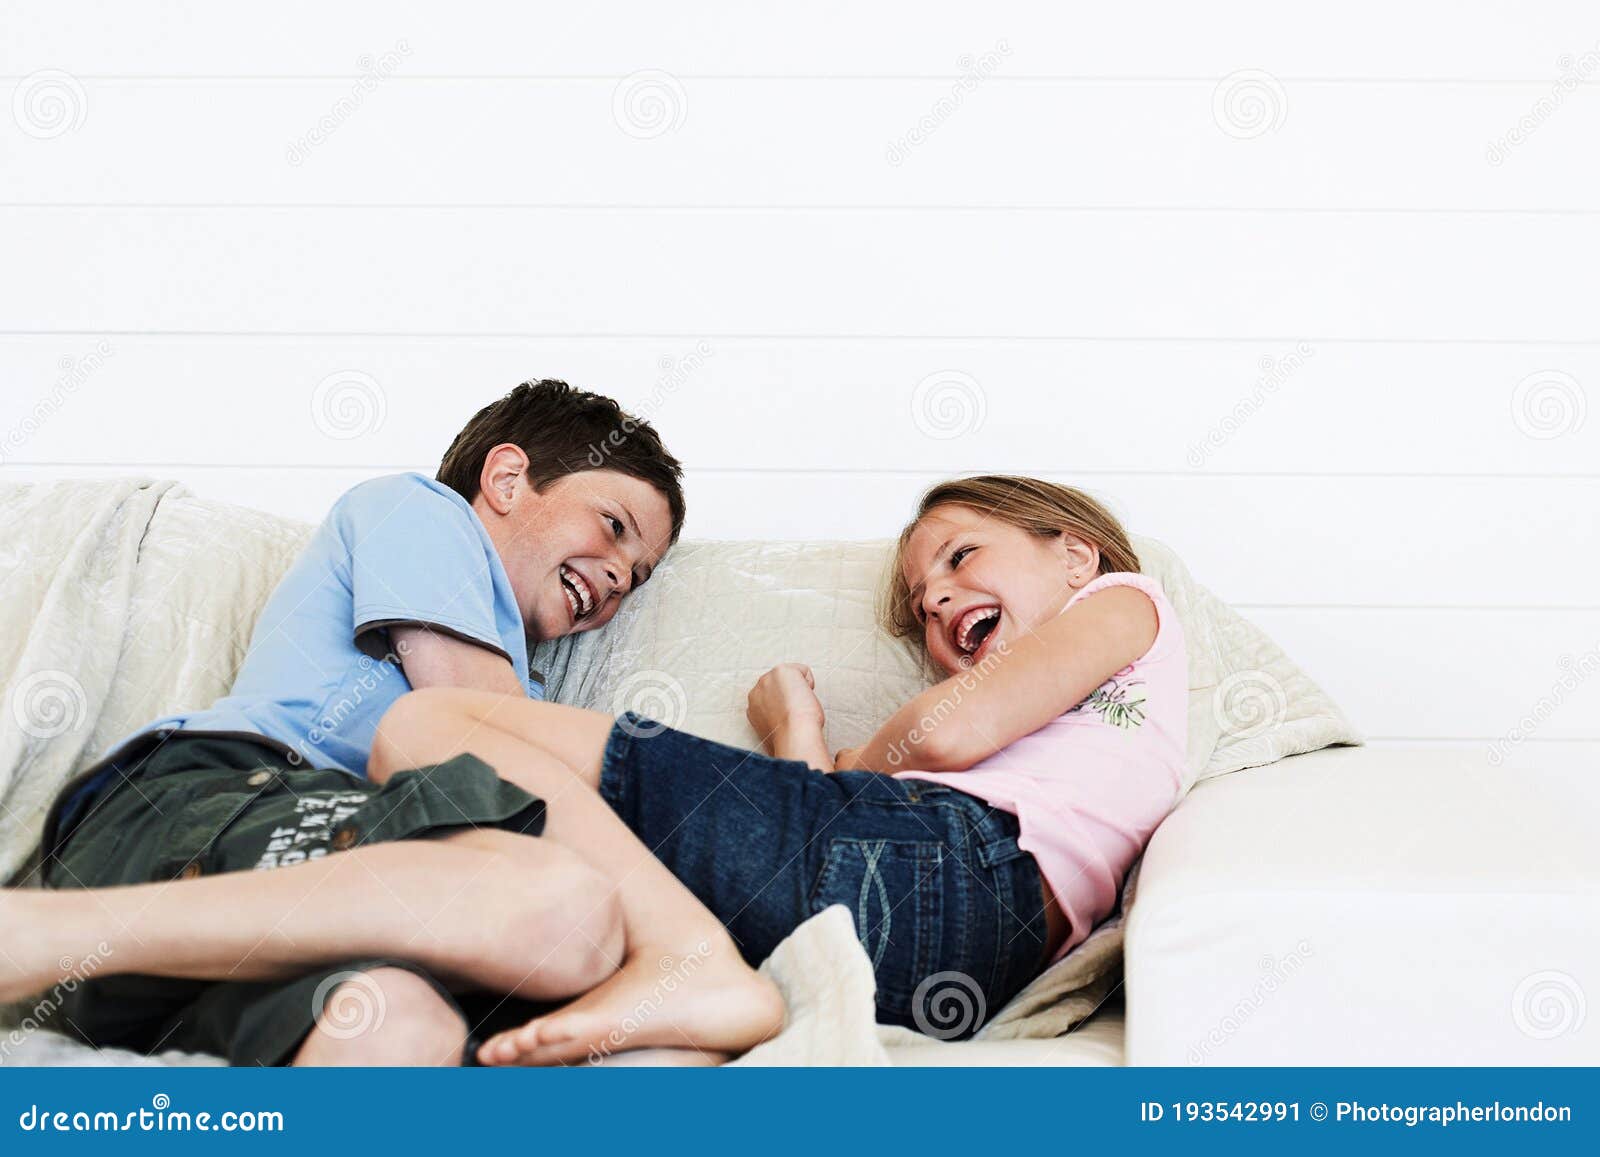 Brother And Sister Relaxing On Sofa Together Stock Image Image Of